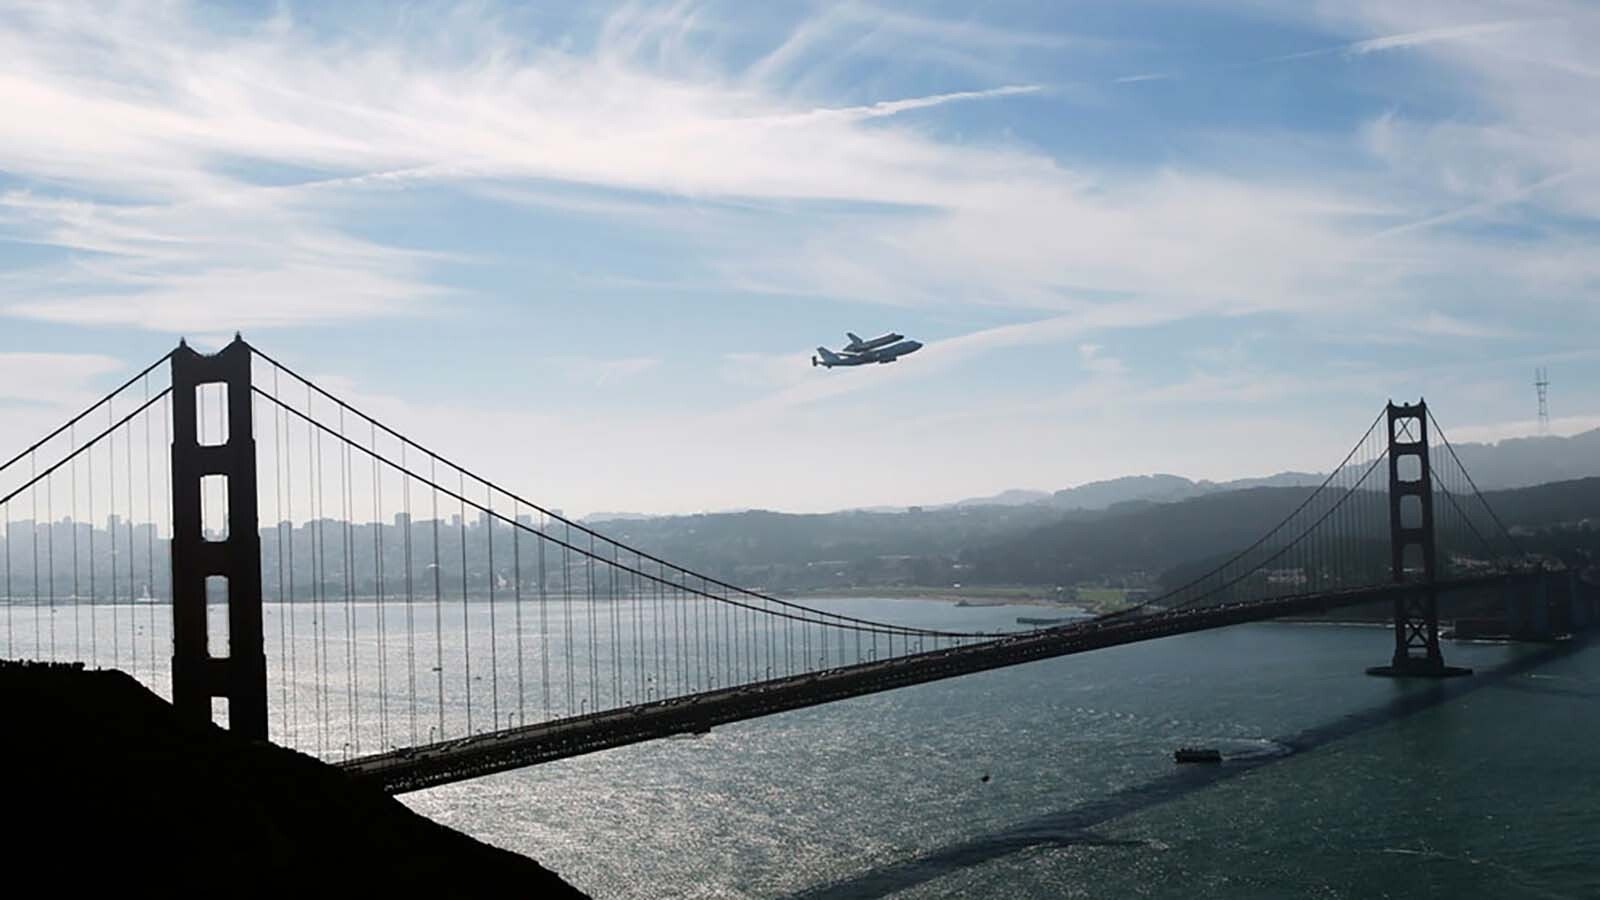 A space shuttle is flown on a 747 jet over the Golden Gate Bridge.